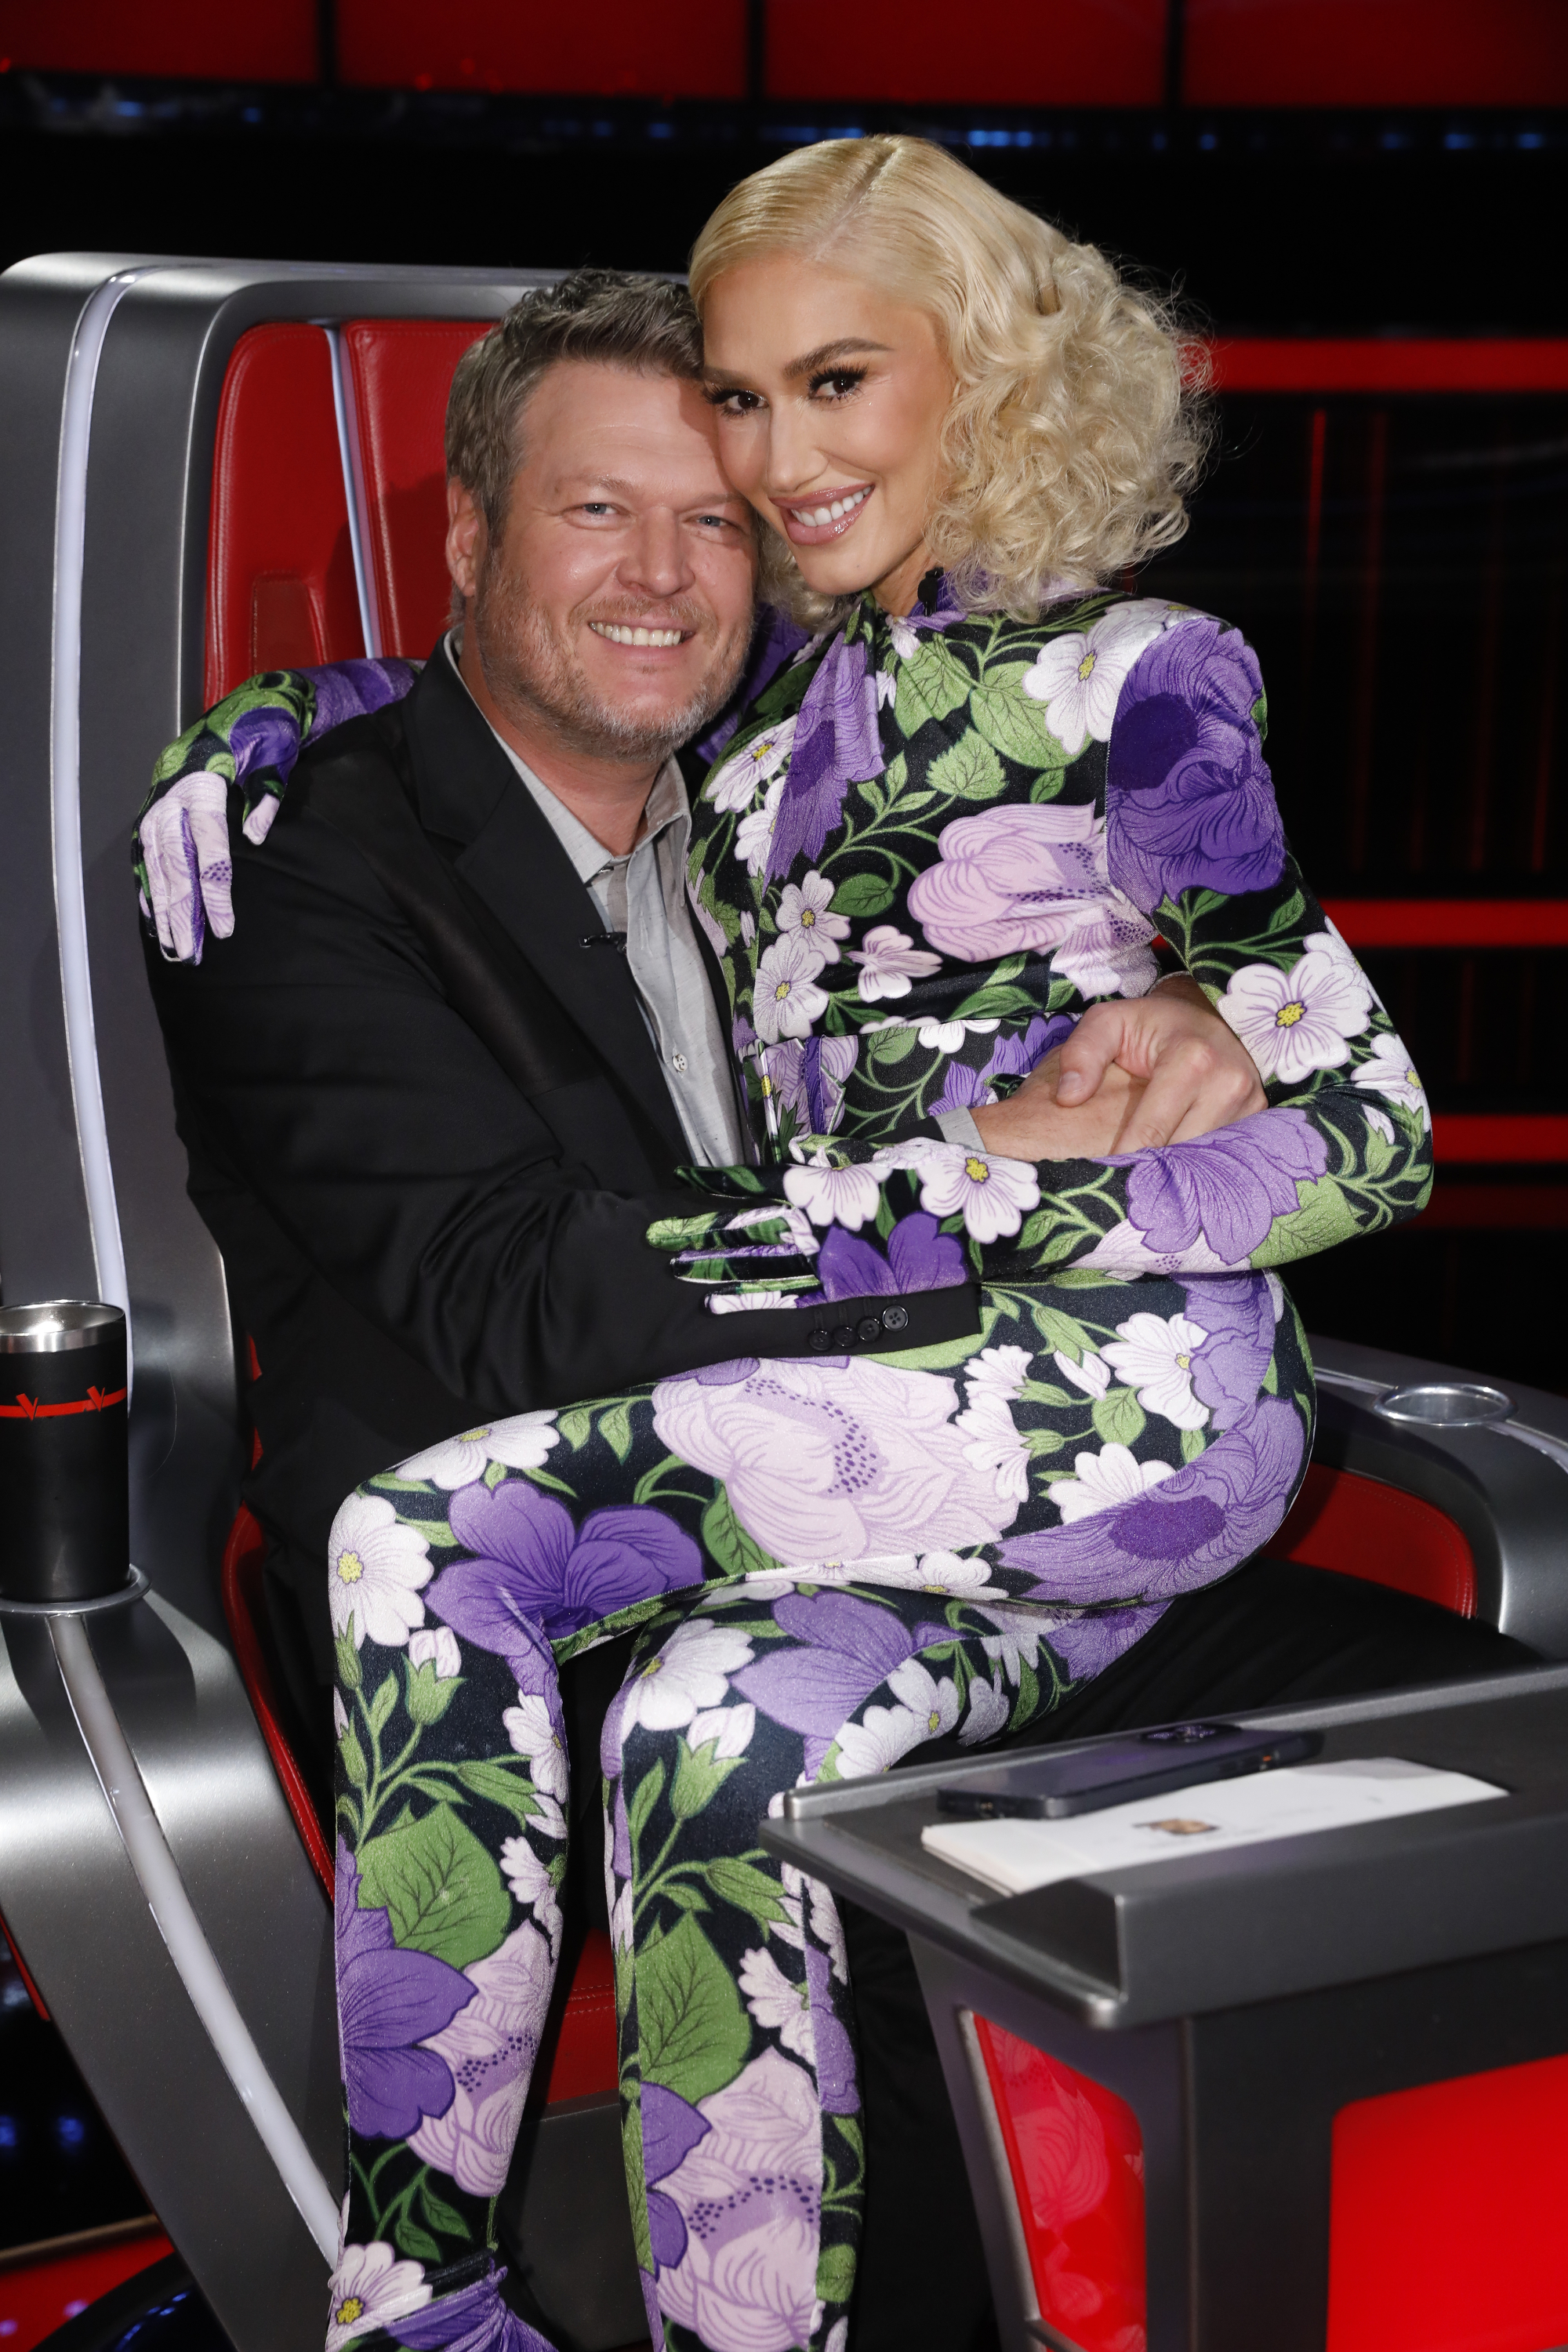 Blake and Gwen fell in love on The Voice